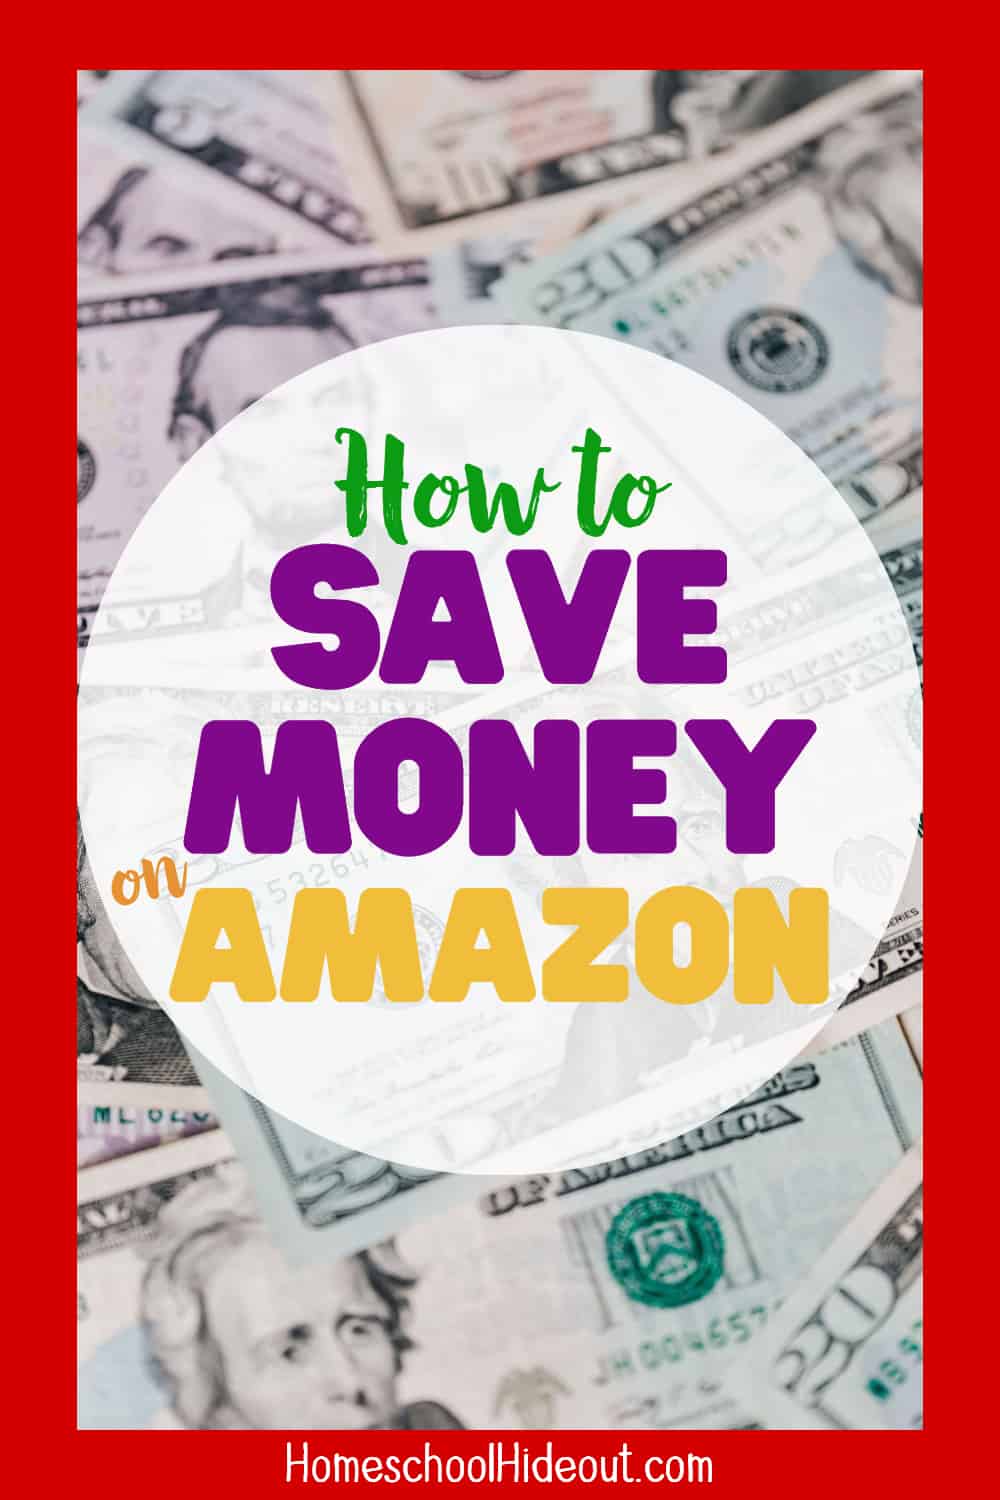 I thought it was impossible to save money on Amazon but this is so simple! Why didn't I think of #3!?!